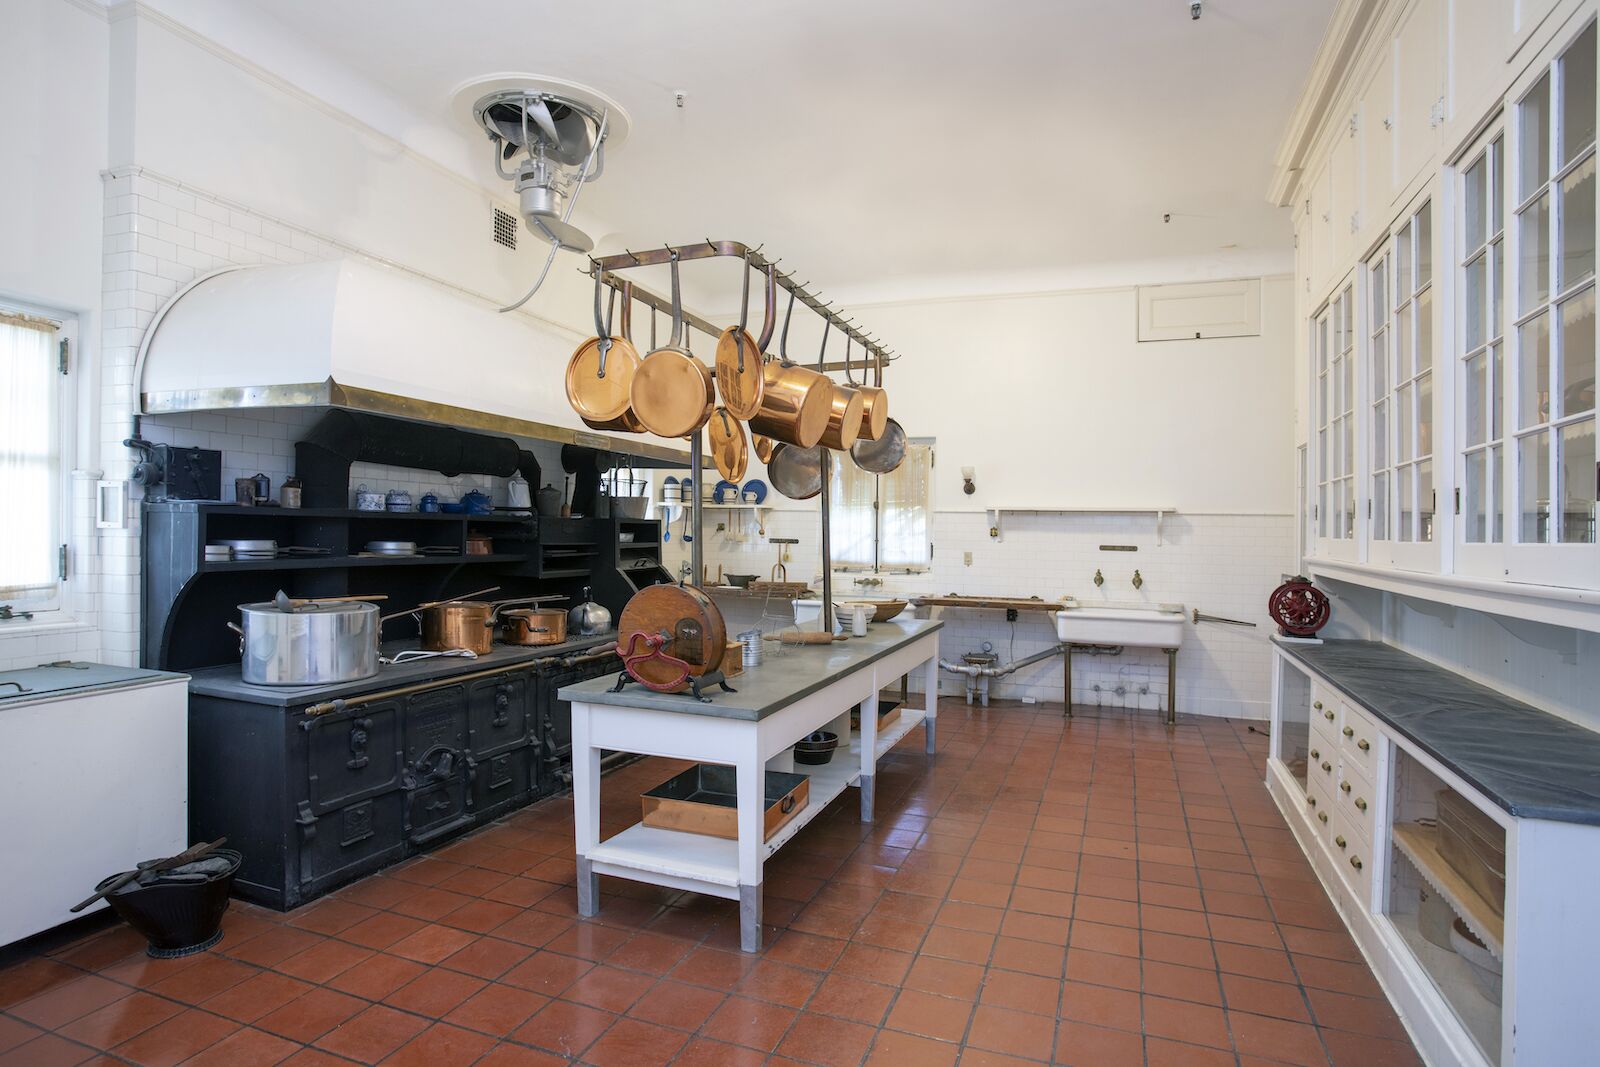 The upstairs kitchen at the Vizcaya Museum and Gardens in Miami